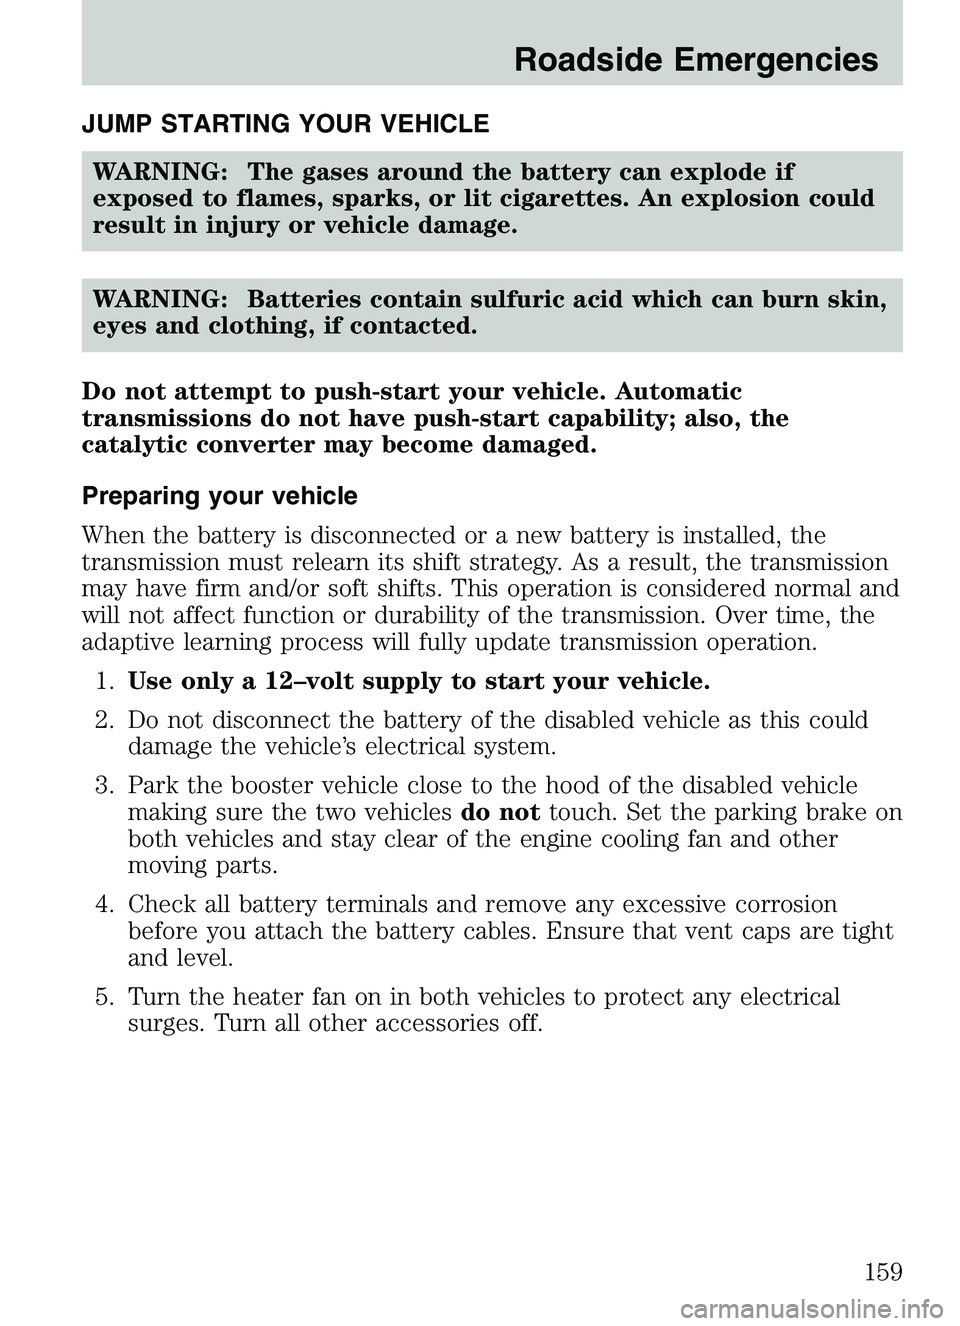 MAZDA MODEL B4000 2003  Owners Manual JUMP STARTING YOUR VEHICLEWARNING: The gases around the battery can explode if
exposed to flames, sparks, or lit cigarettes. An explosion could
result in injury or vehicle damage.
WARNING: Batteries c